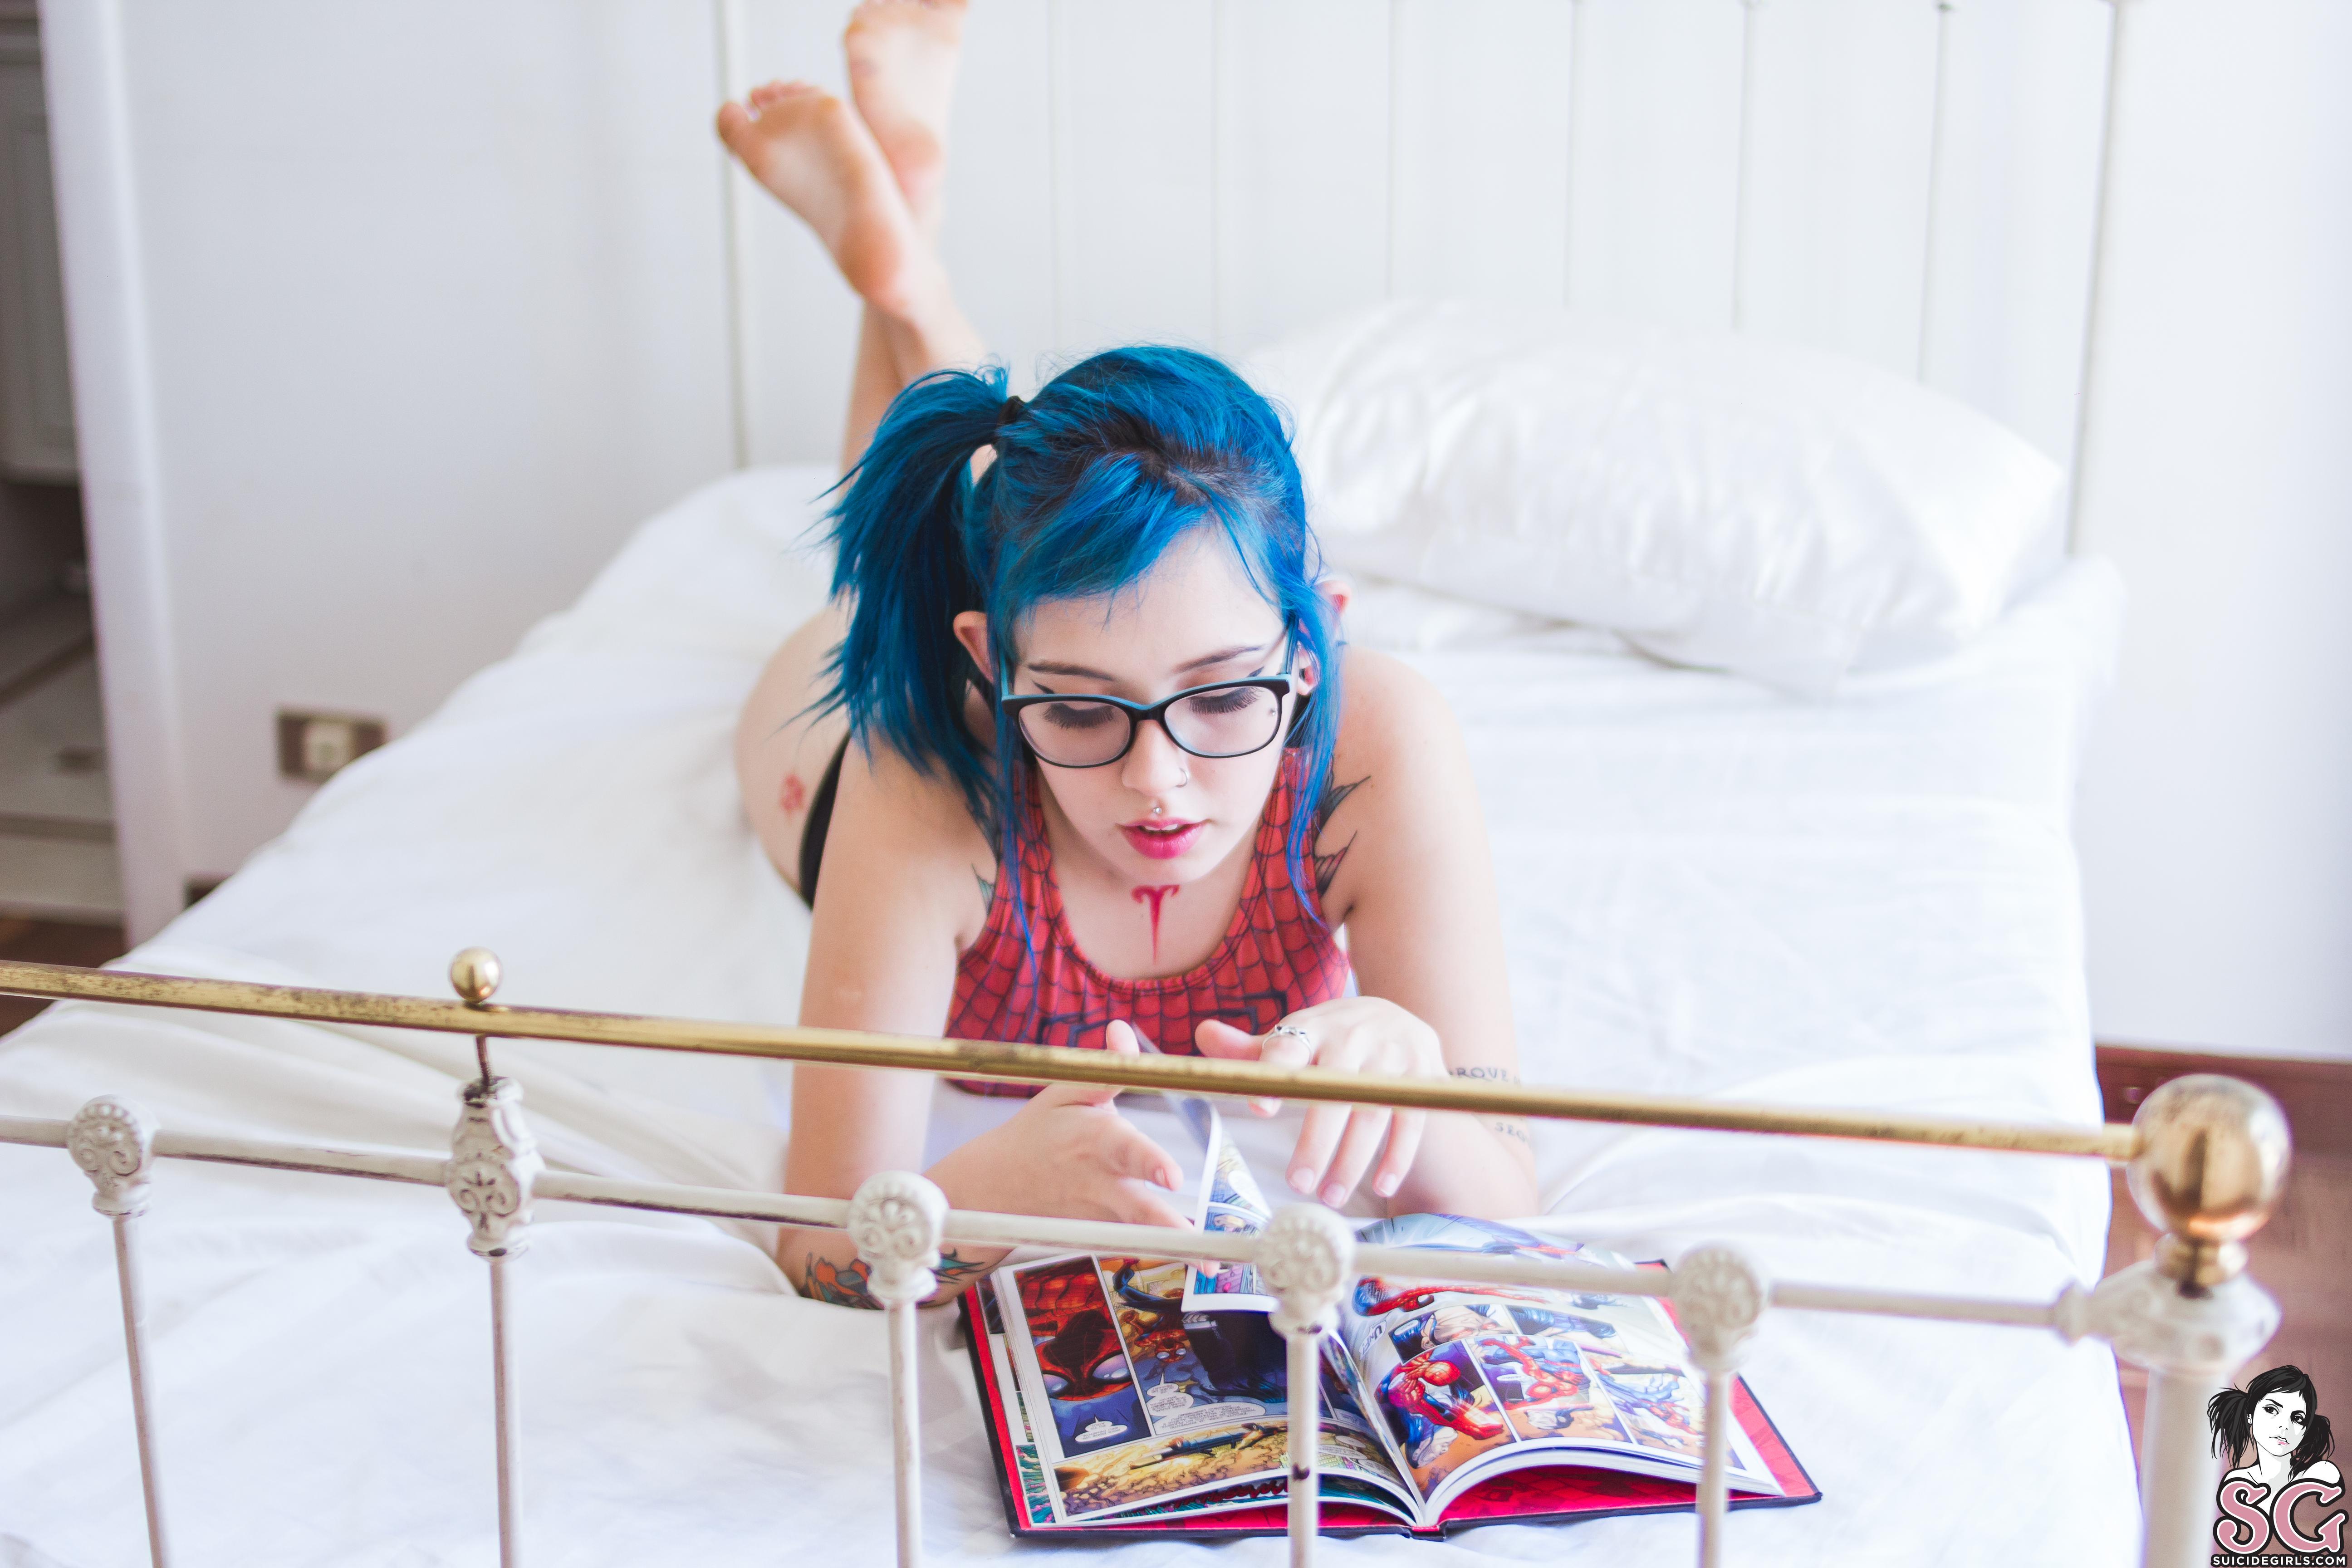 People 5184x3456 Vohs suicide Suicide Girls tattoo model in bed dyed hair blue hair pale glasses cosplay comics women indoors Spider-Man